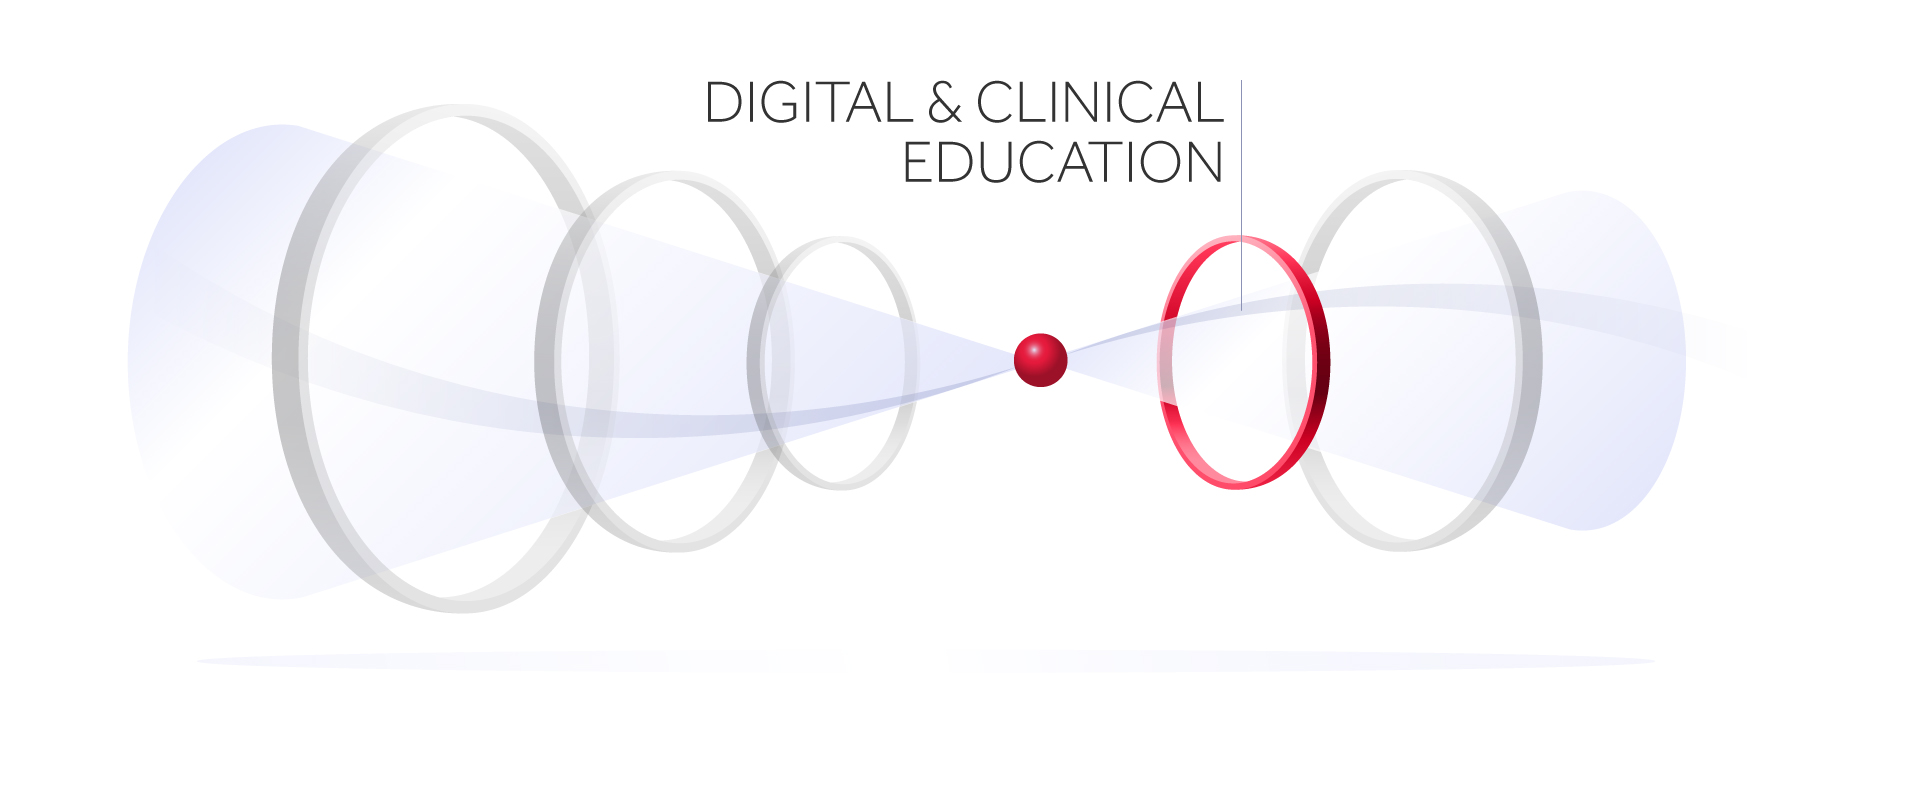 Digital and clinical education